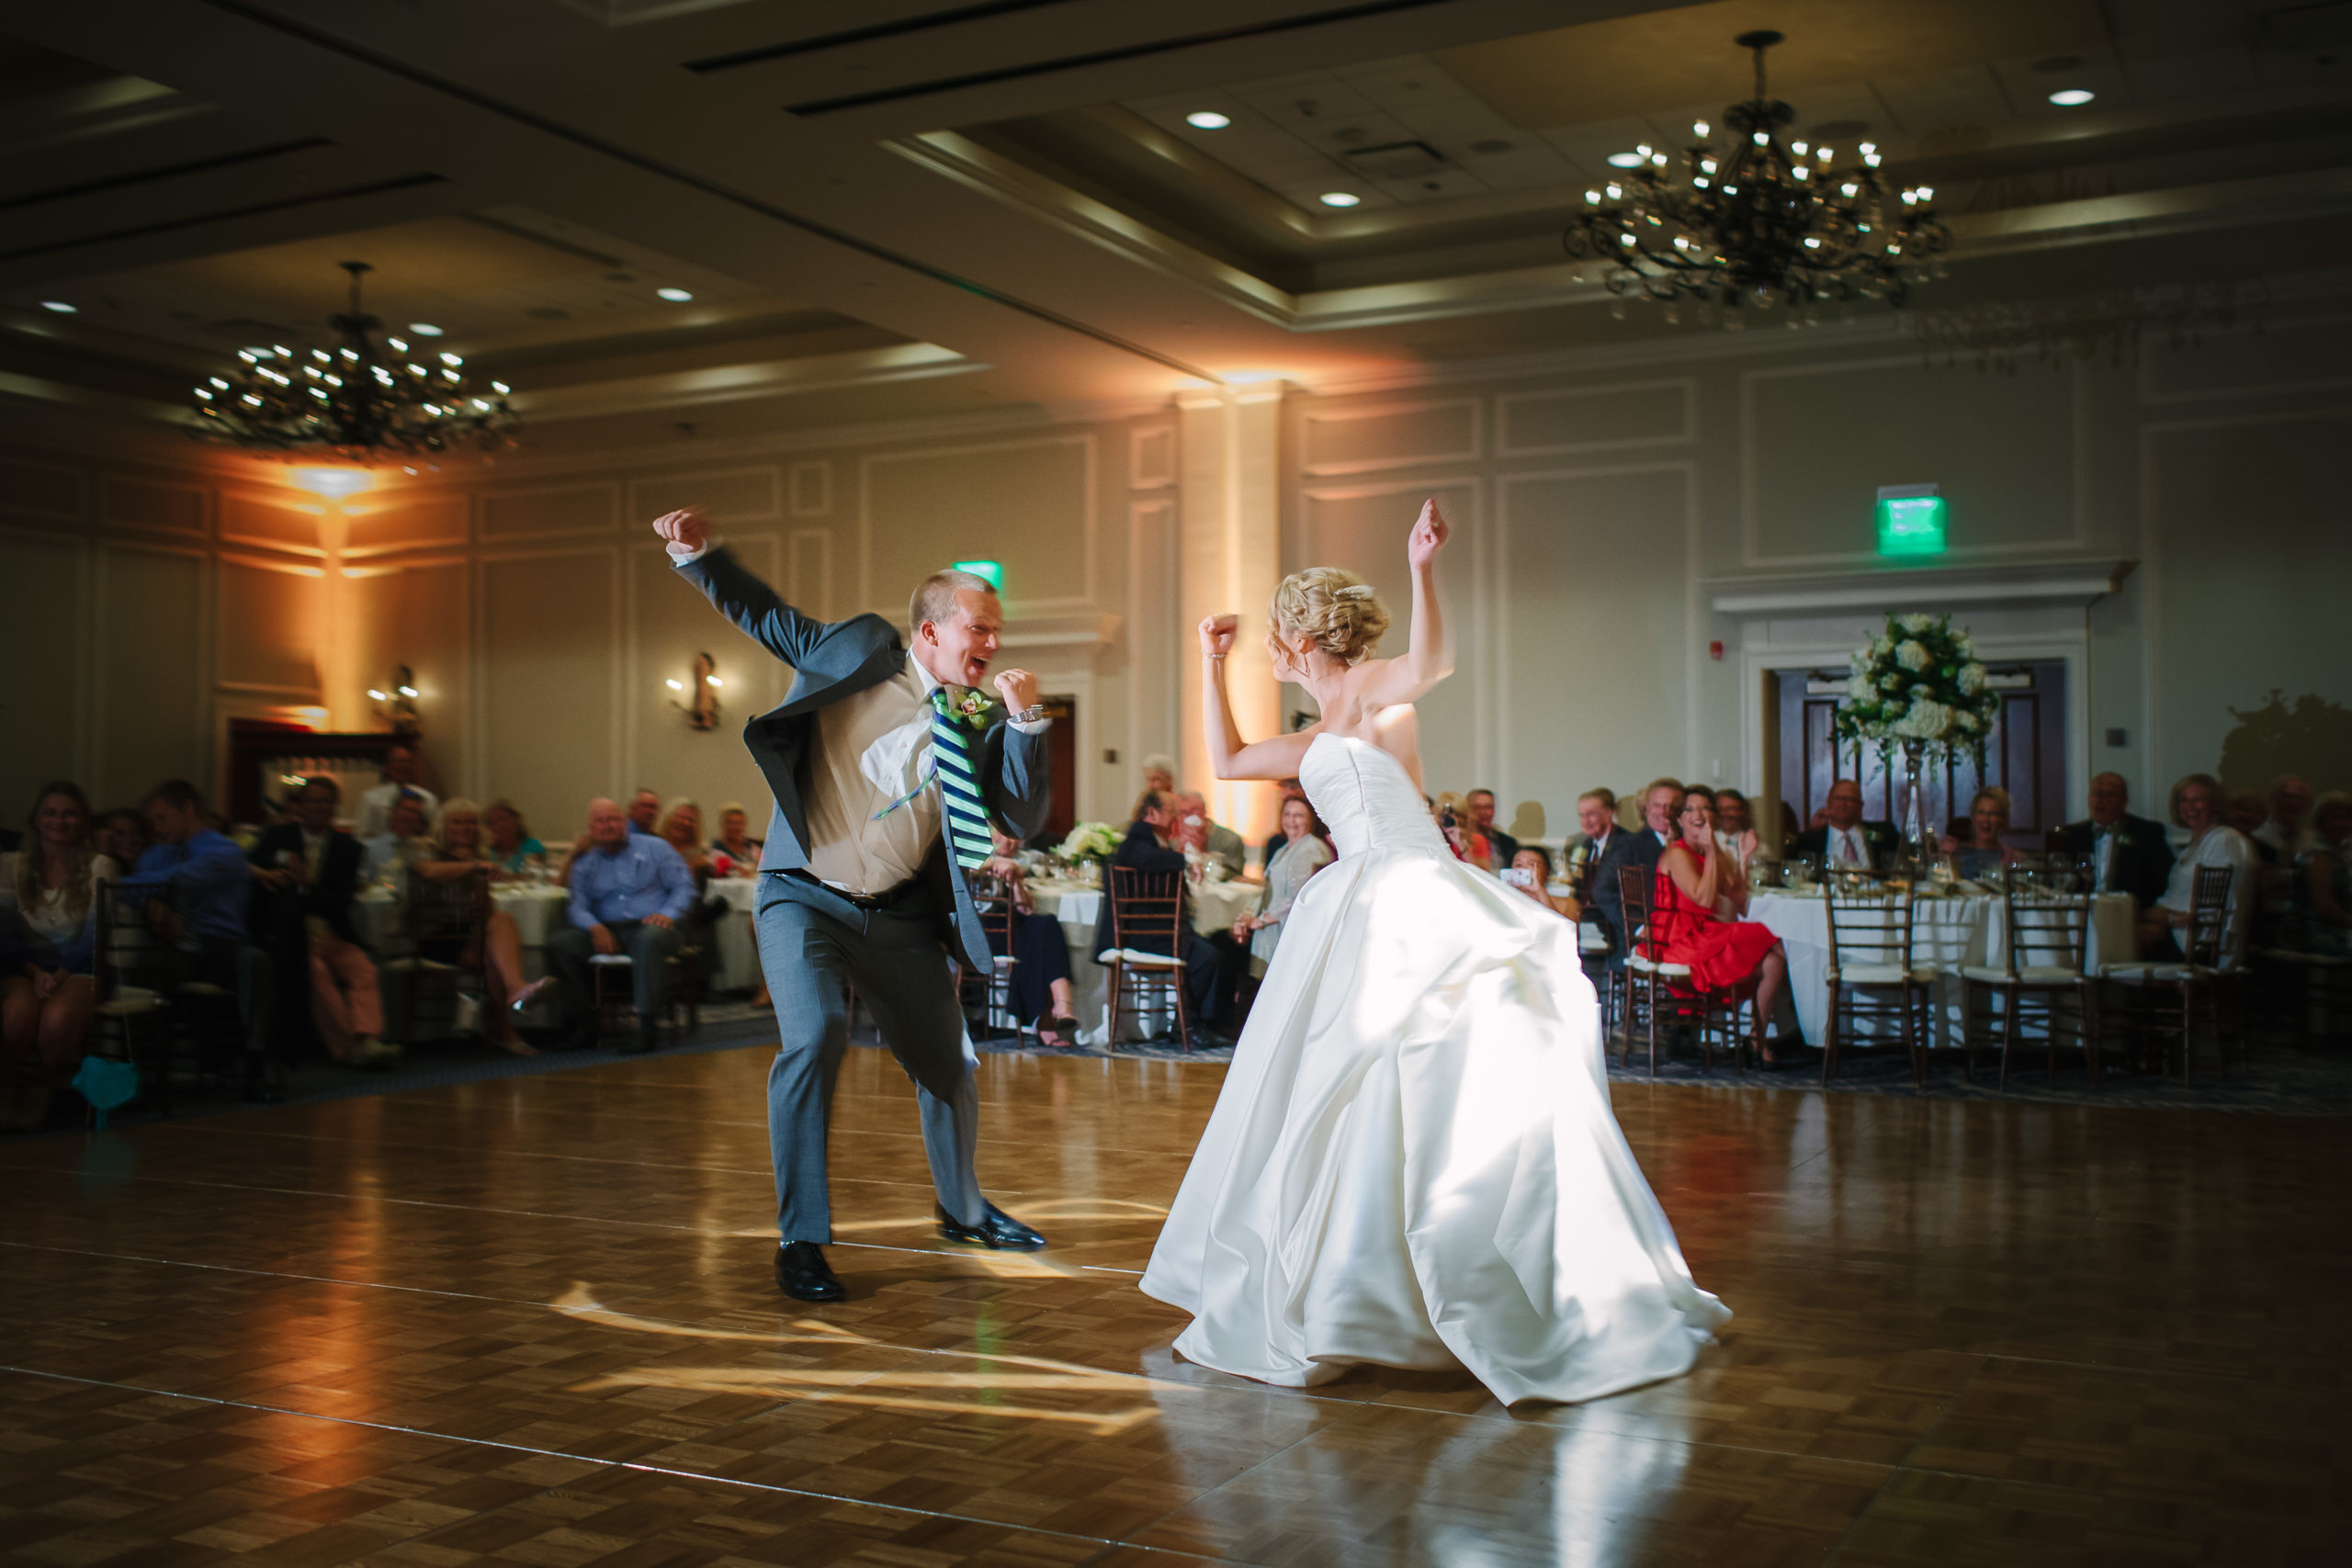 Williamsburg Lodge Weddings-First Dance with special choreography